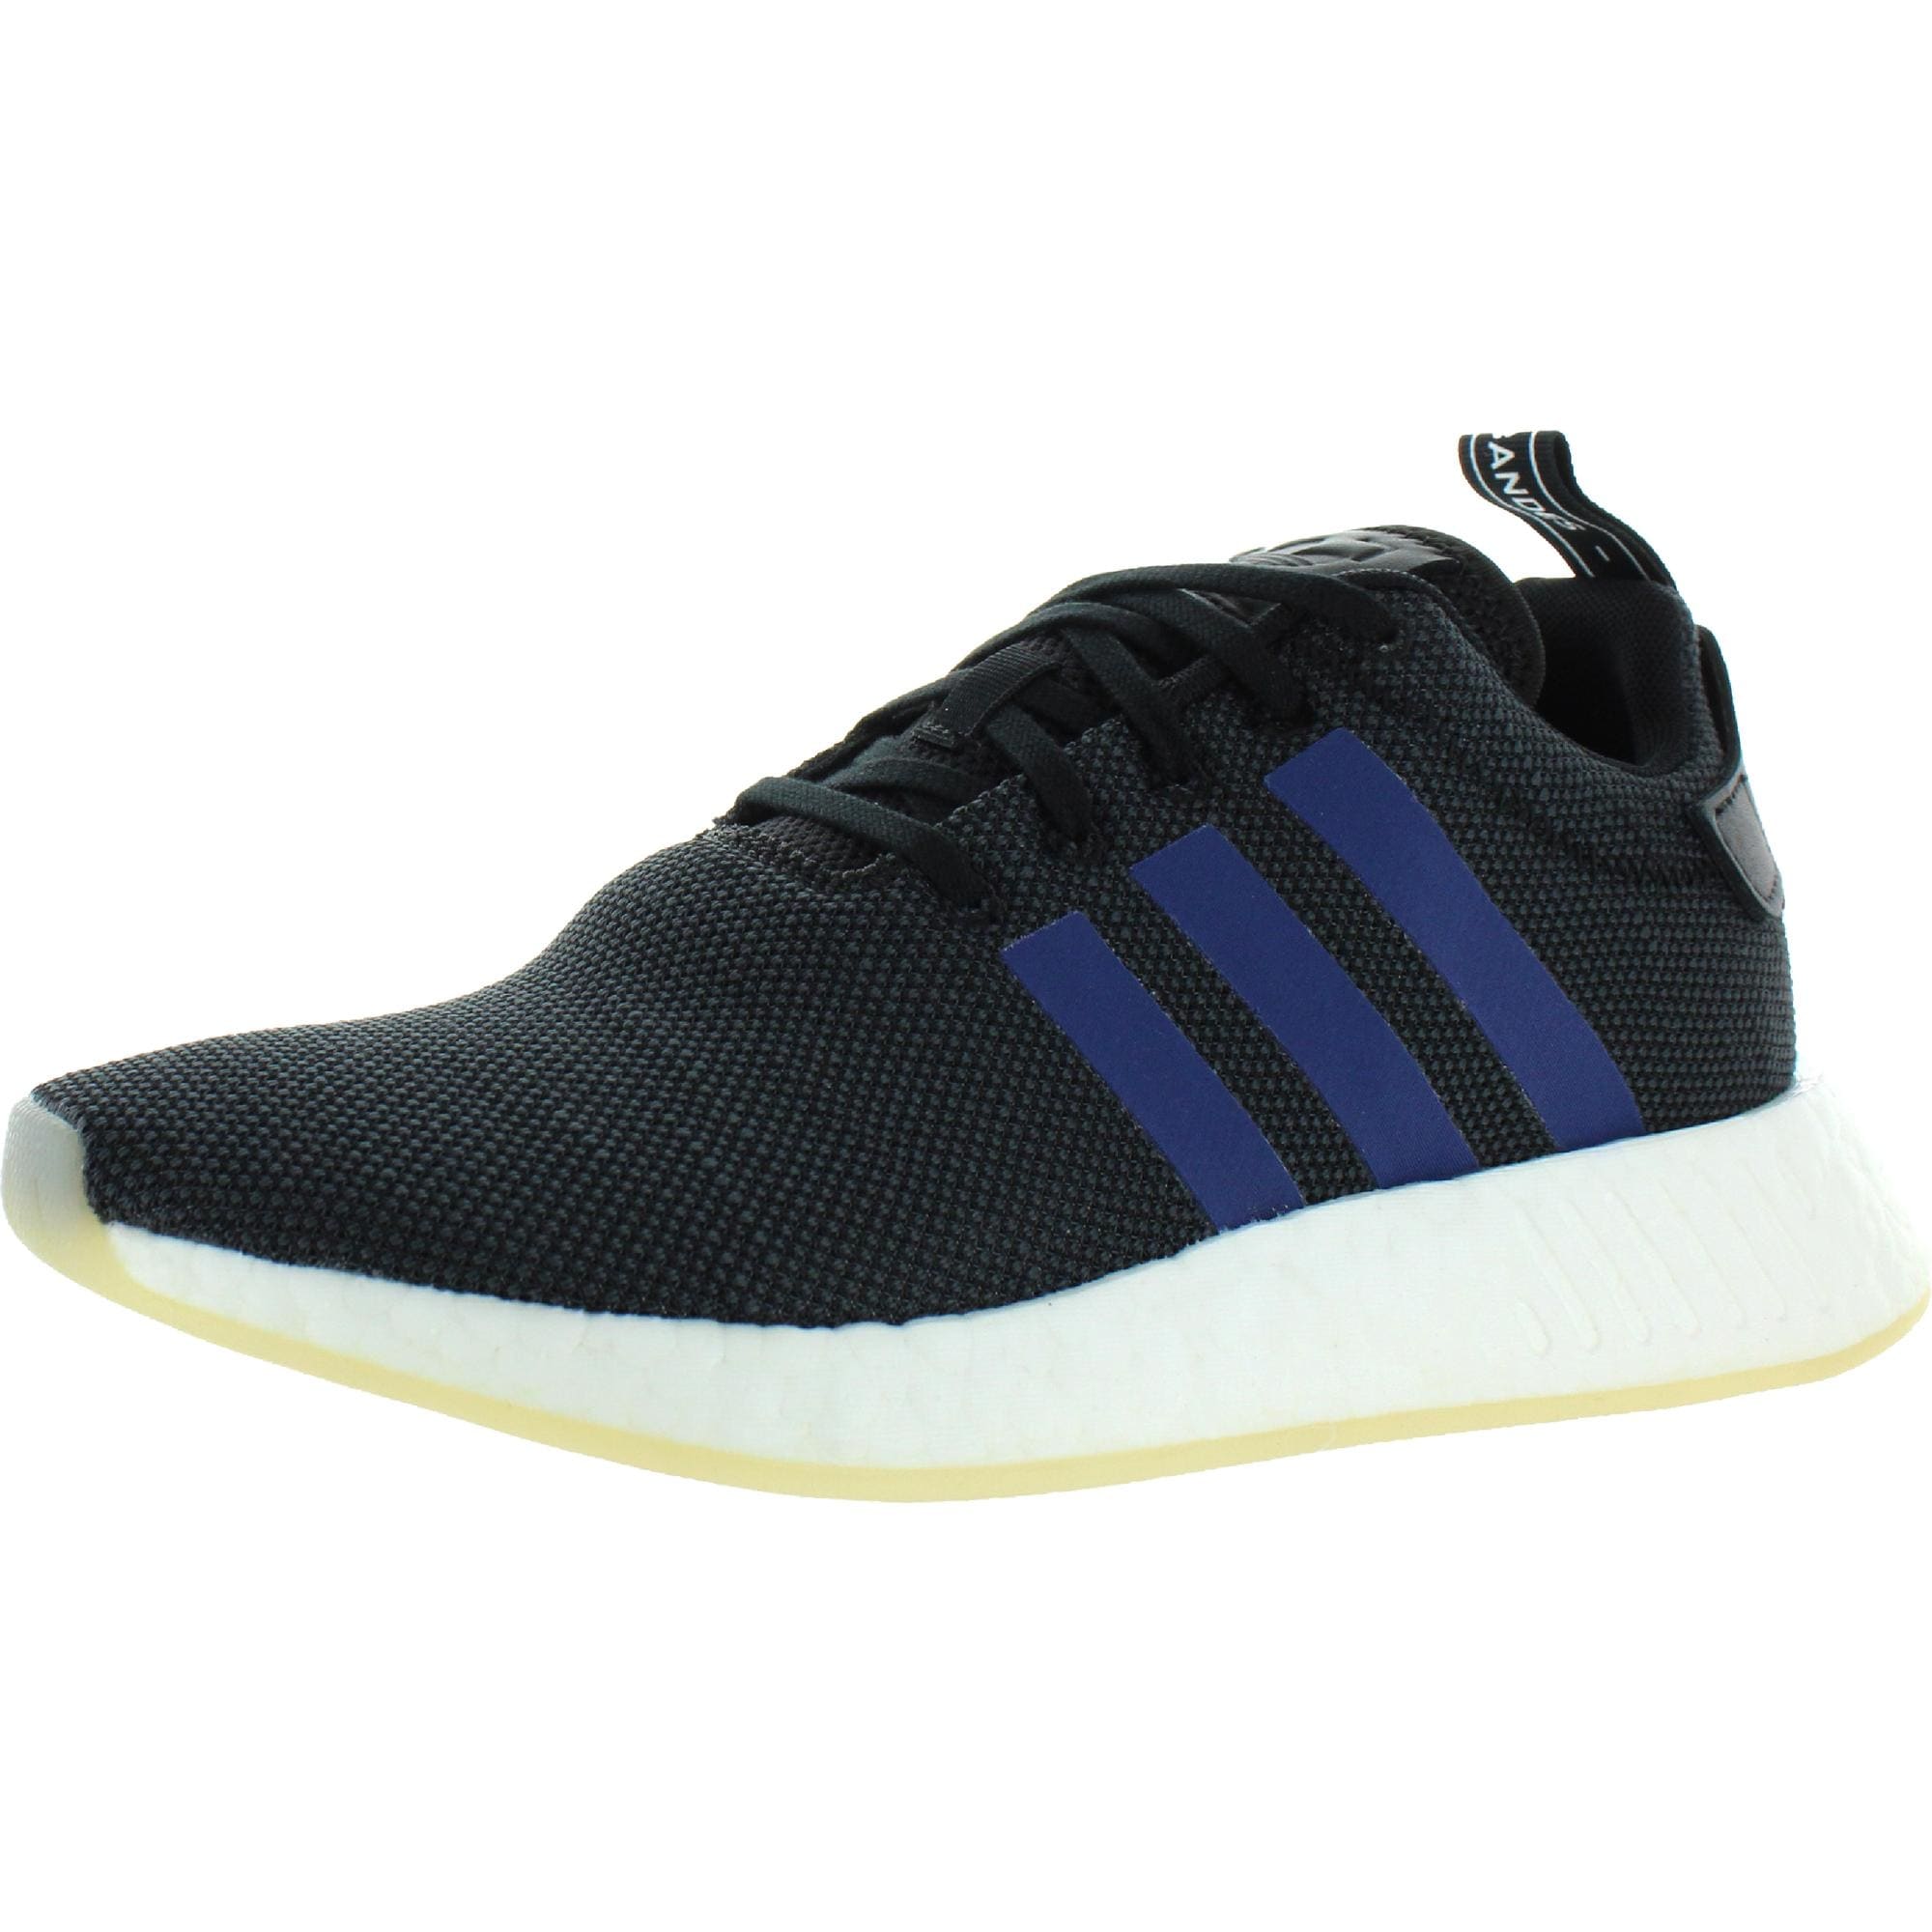 Adidas Womens NMD R2 W Sneakers Fitness Gym Black/Navy Blue/White - Overstock - 30603401